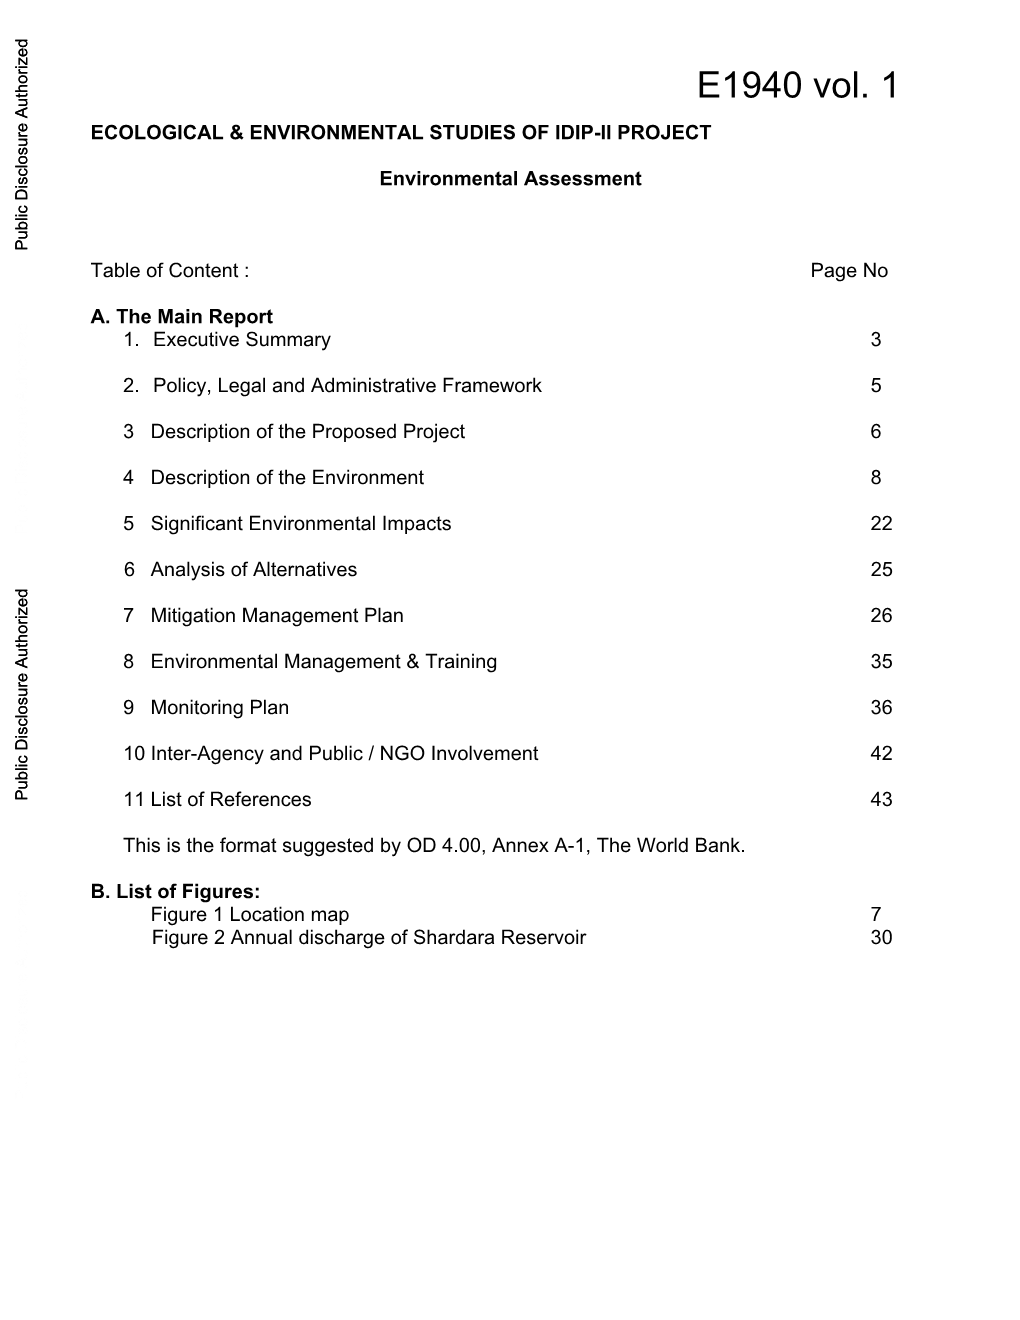 E1940 Vol. 1 ECOLOGICAL & ENVIRONMENTAL STUDIES of IDIP-II PROJECT